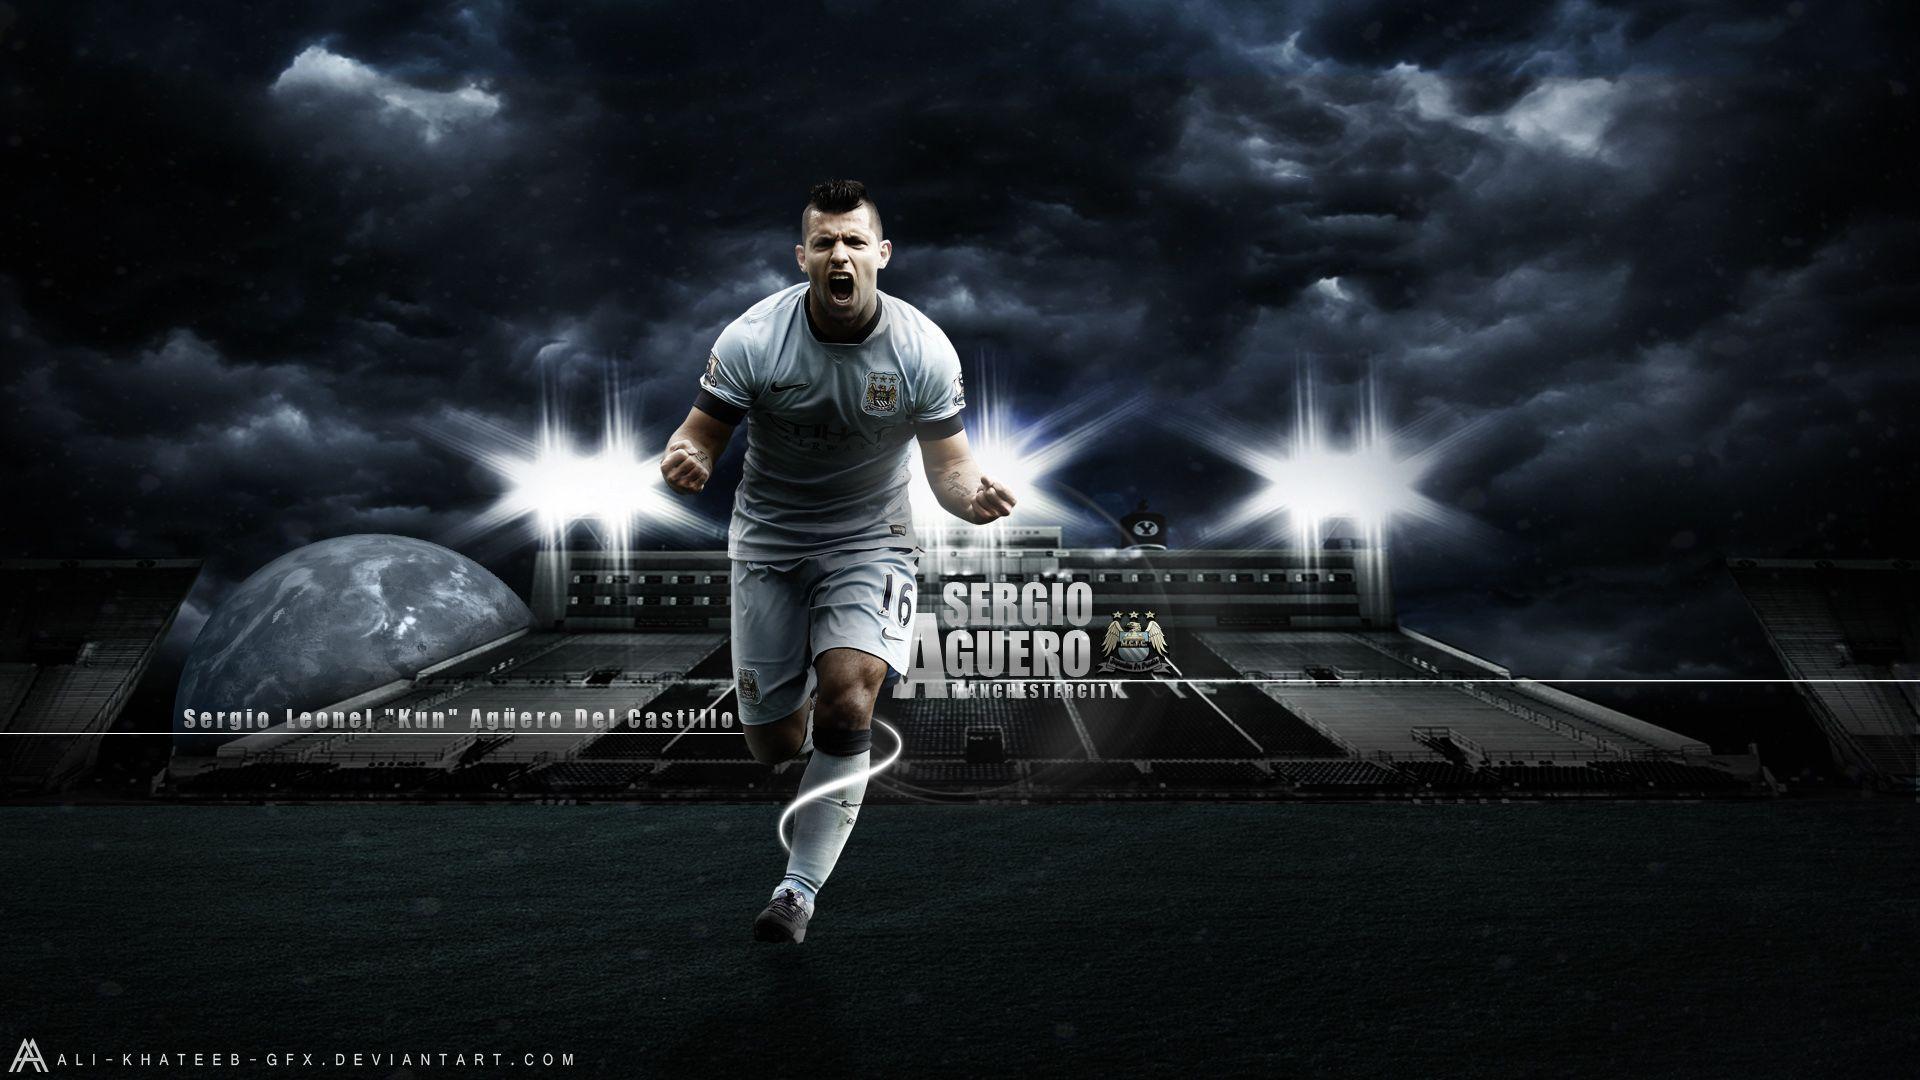 Sergio Aguero Wallpapers High Resolution and Quality